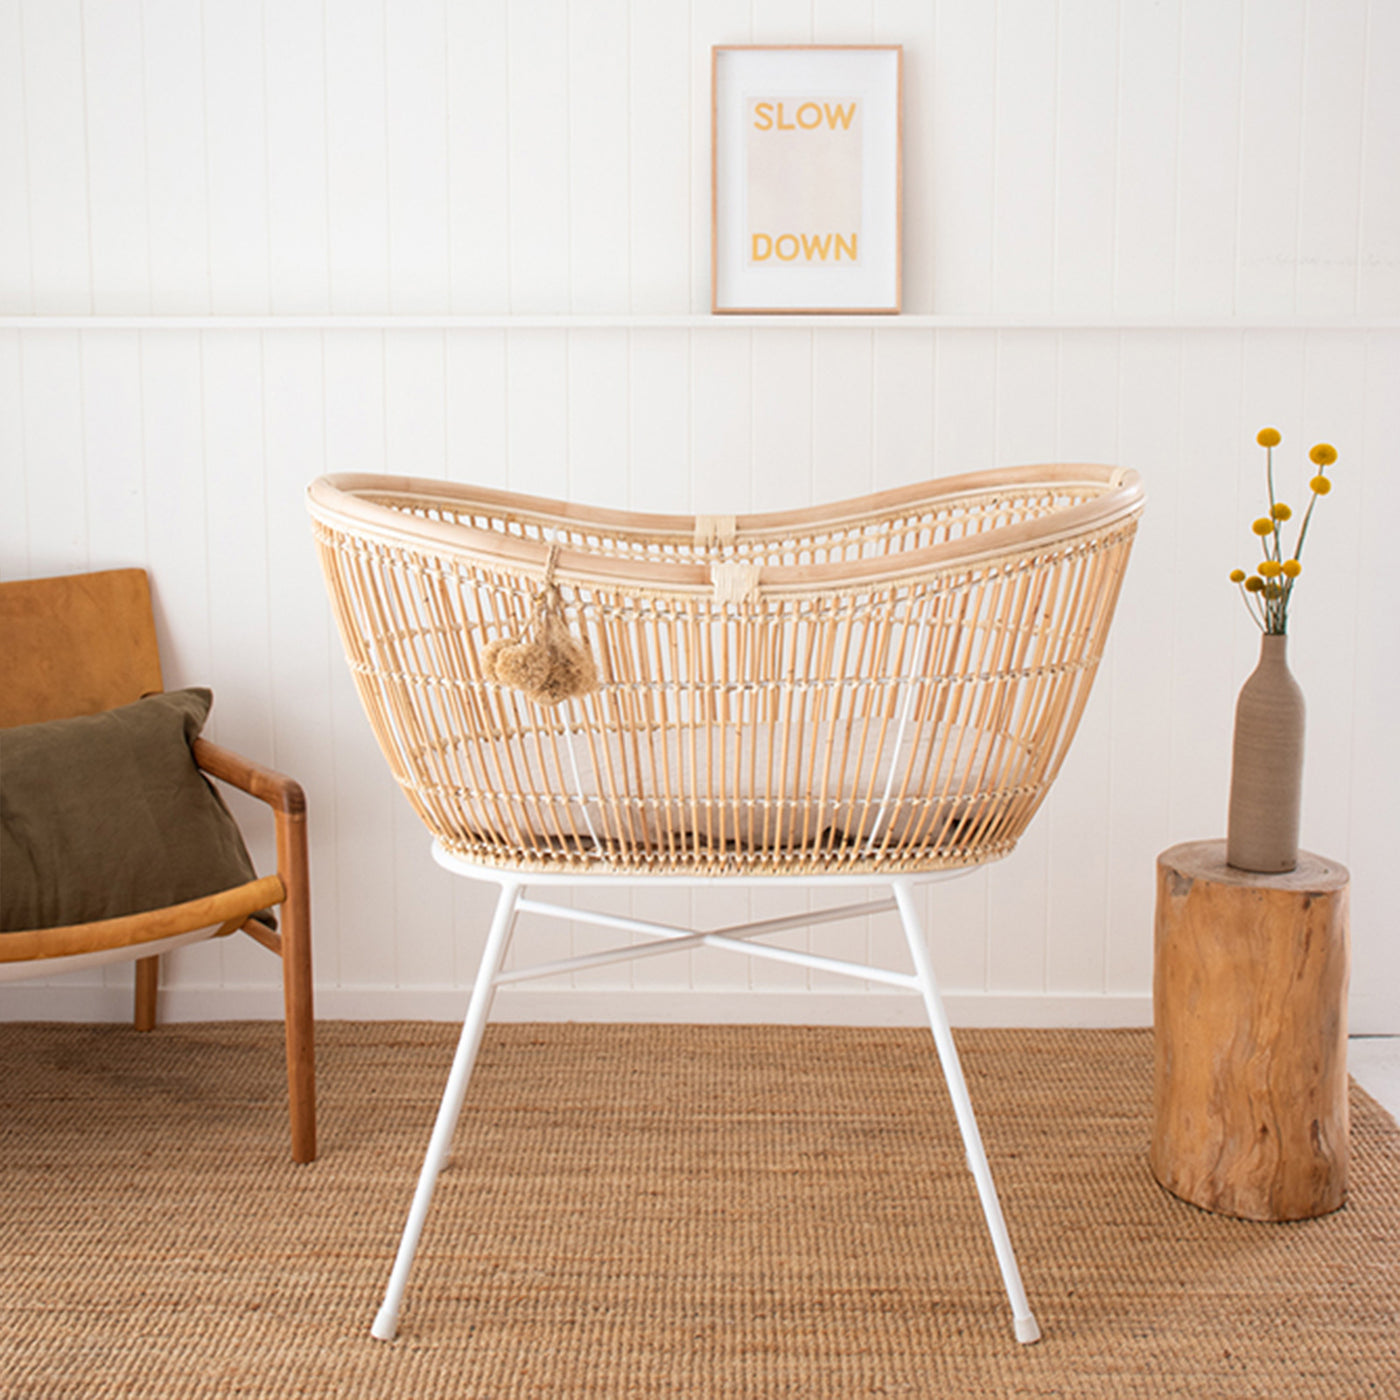 French Flax Linen Bassinet Sheet in Natural